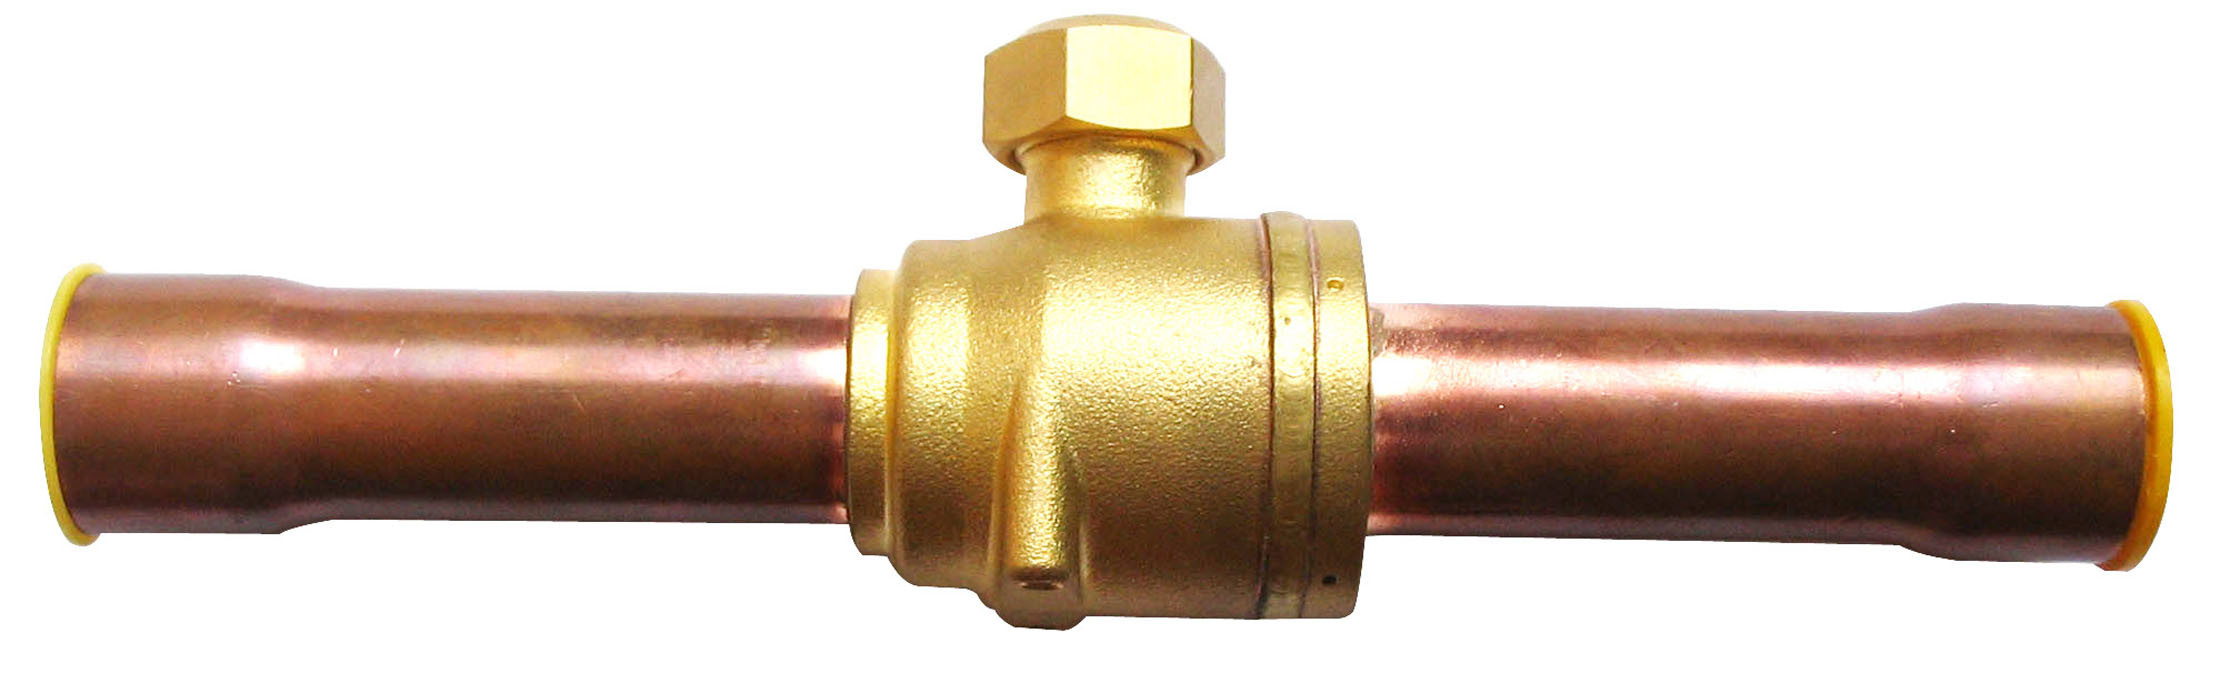 Refrigeration Ball Valve Without Needle/Brass Ball Valve/Refrigerating Parts/Refrigeration Component/Air Conditioning Parts